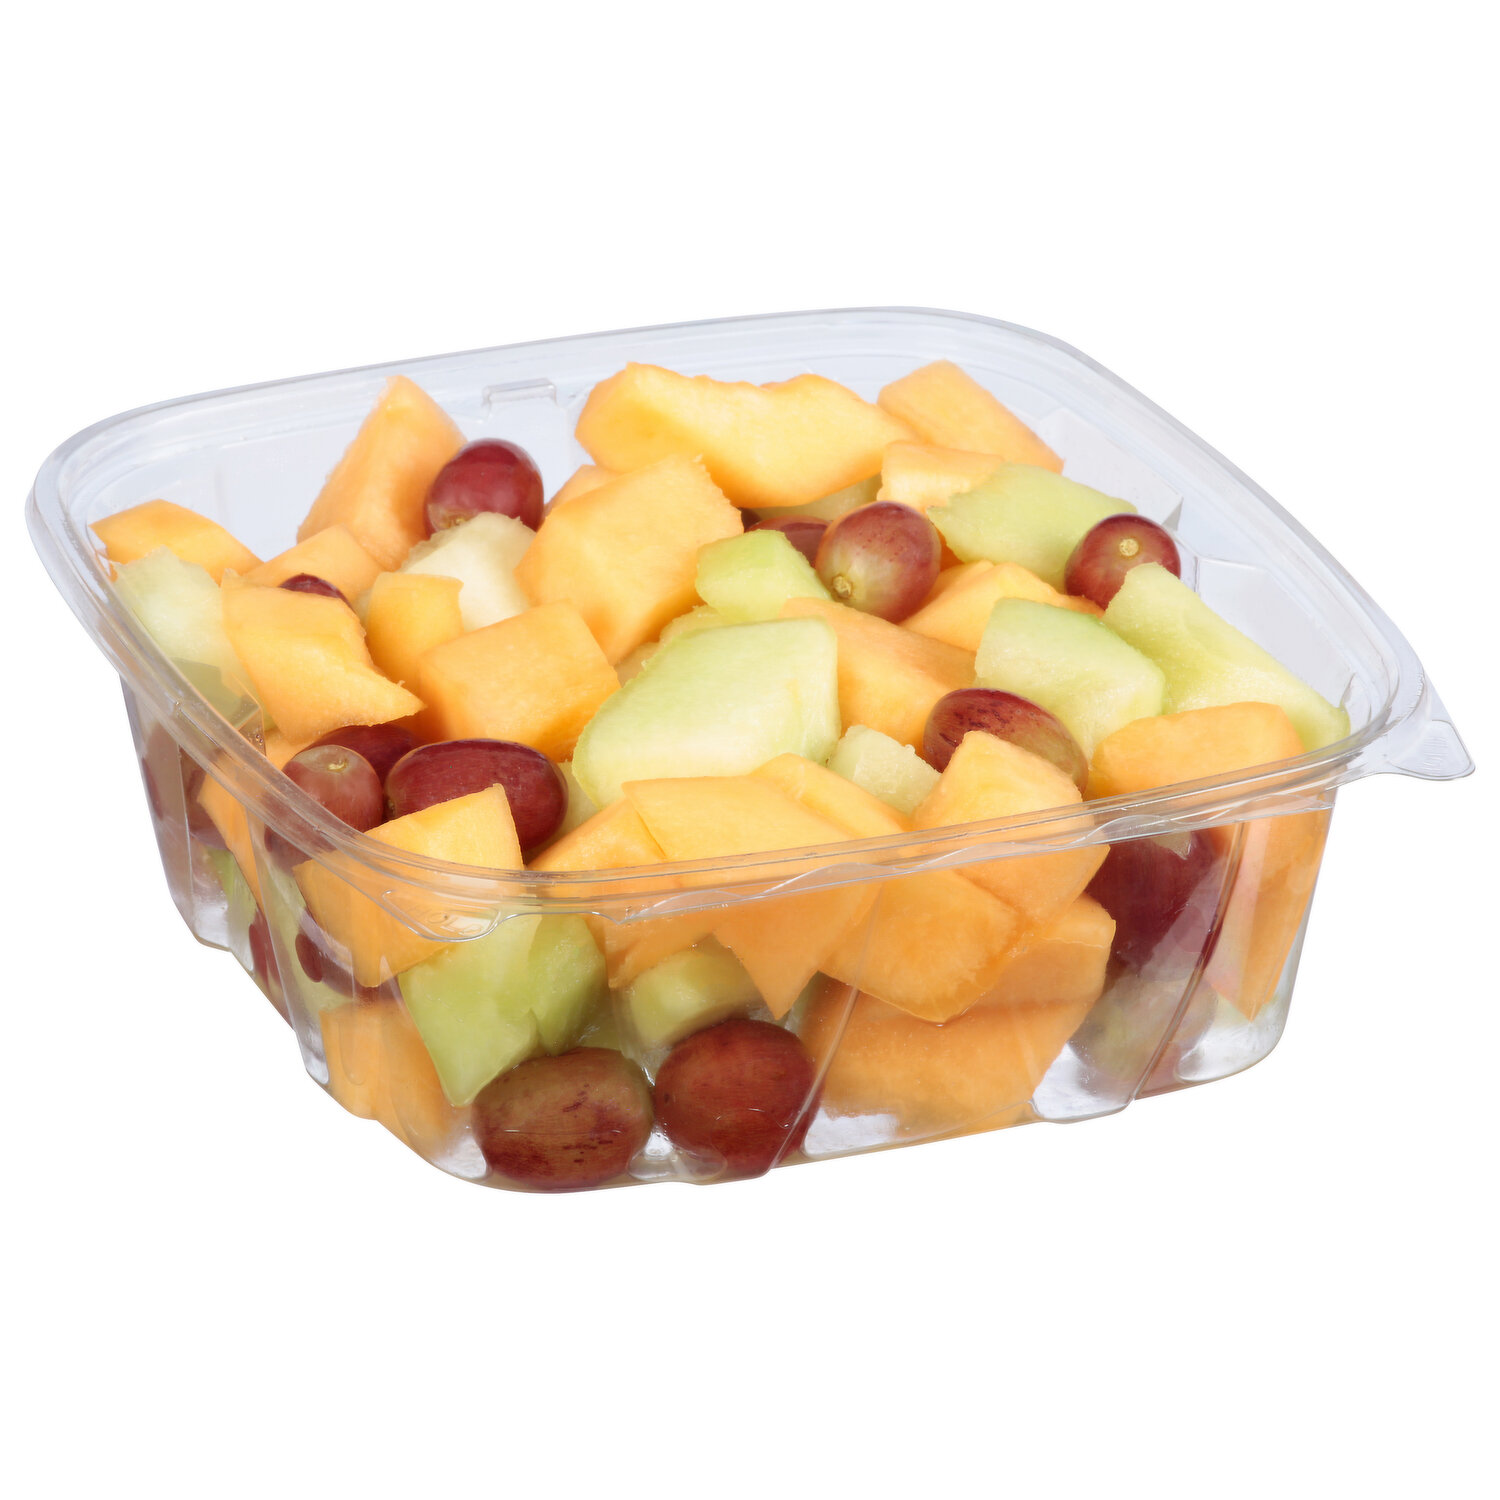 Fresh cut fruit in plastic take away containers a a Whole Foods in